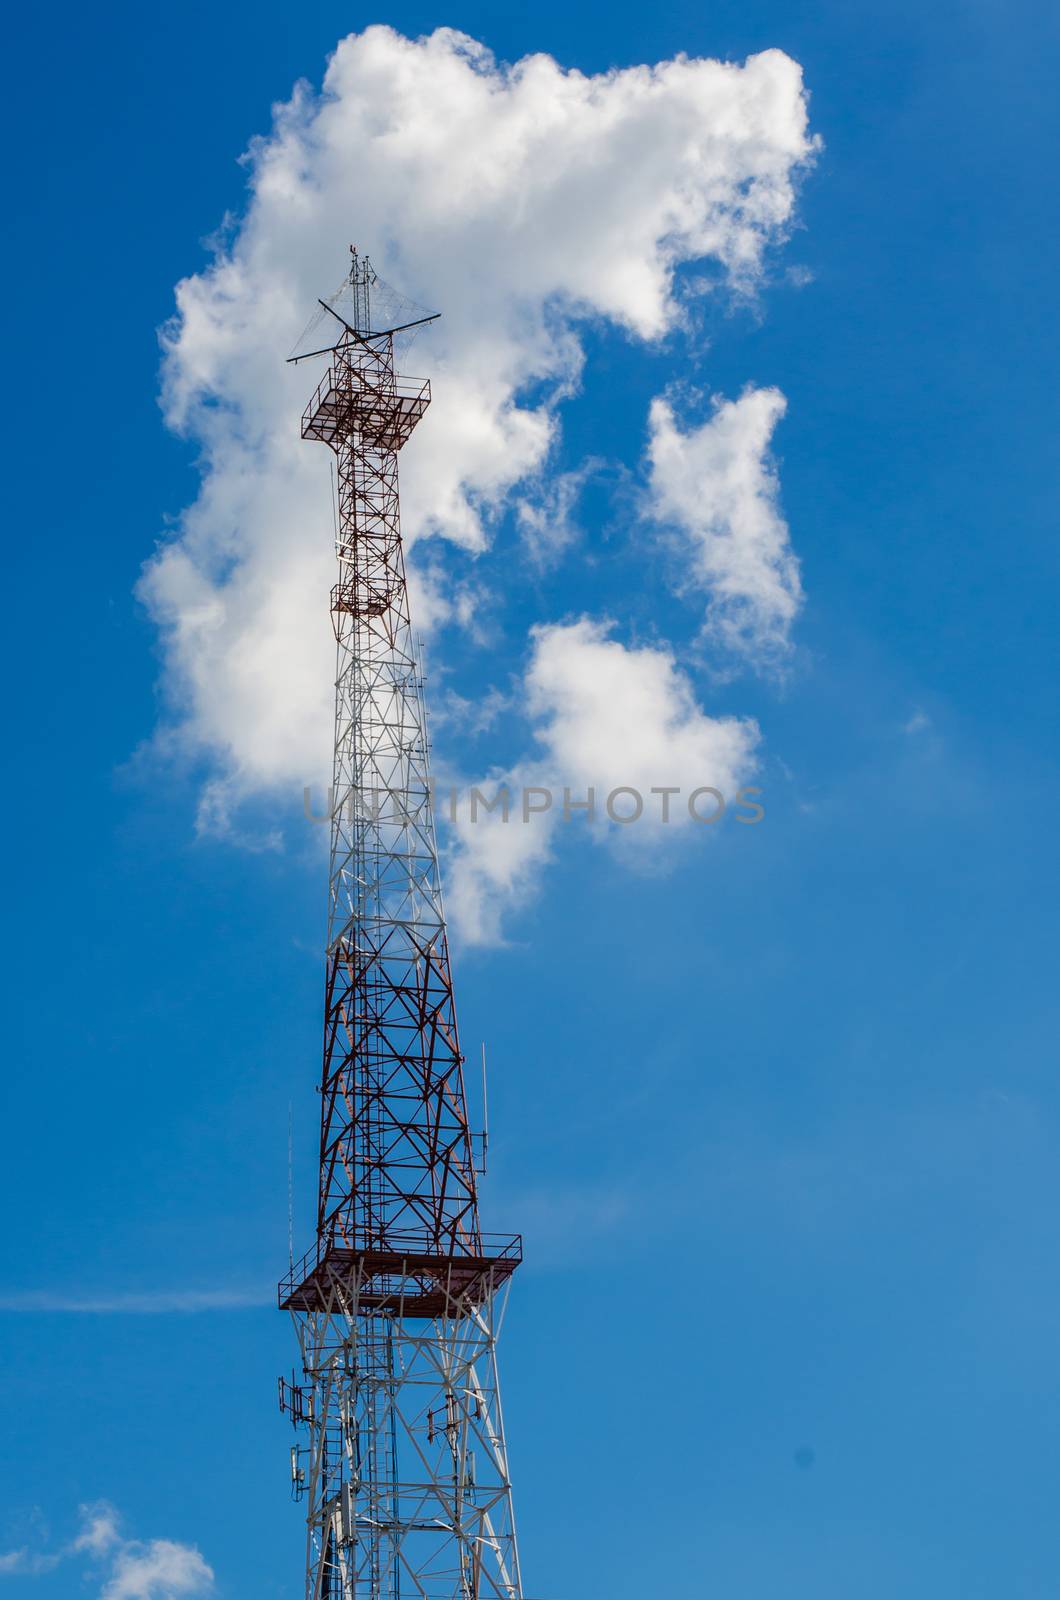 mobile antenna tower against blue sky background by photobyphotoboy